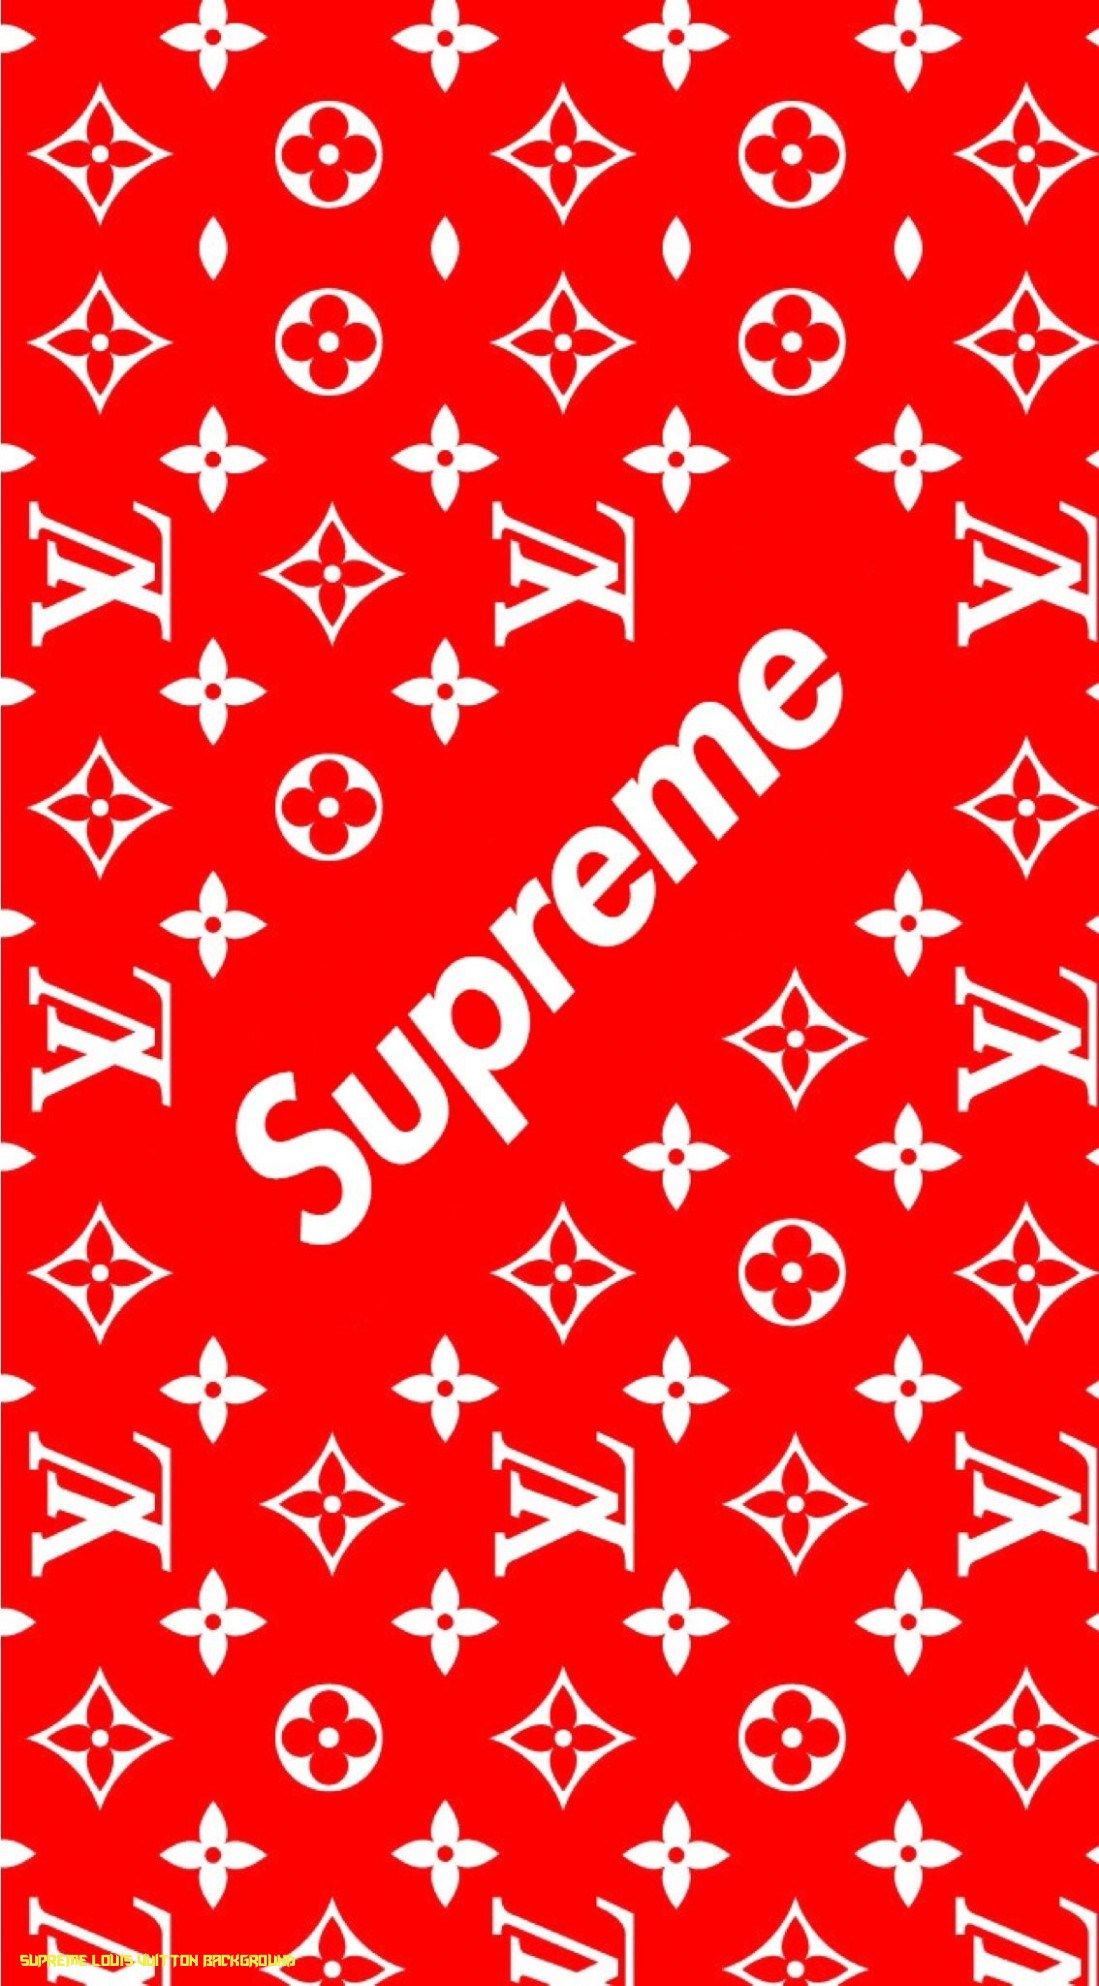 Supreme Louis Vuitton Background Is So Famous, But Why?. Supreme